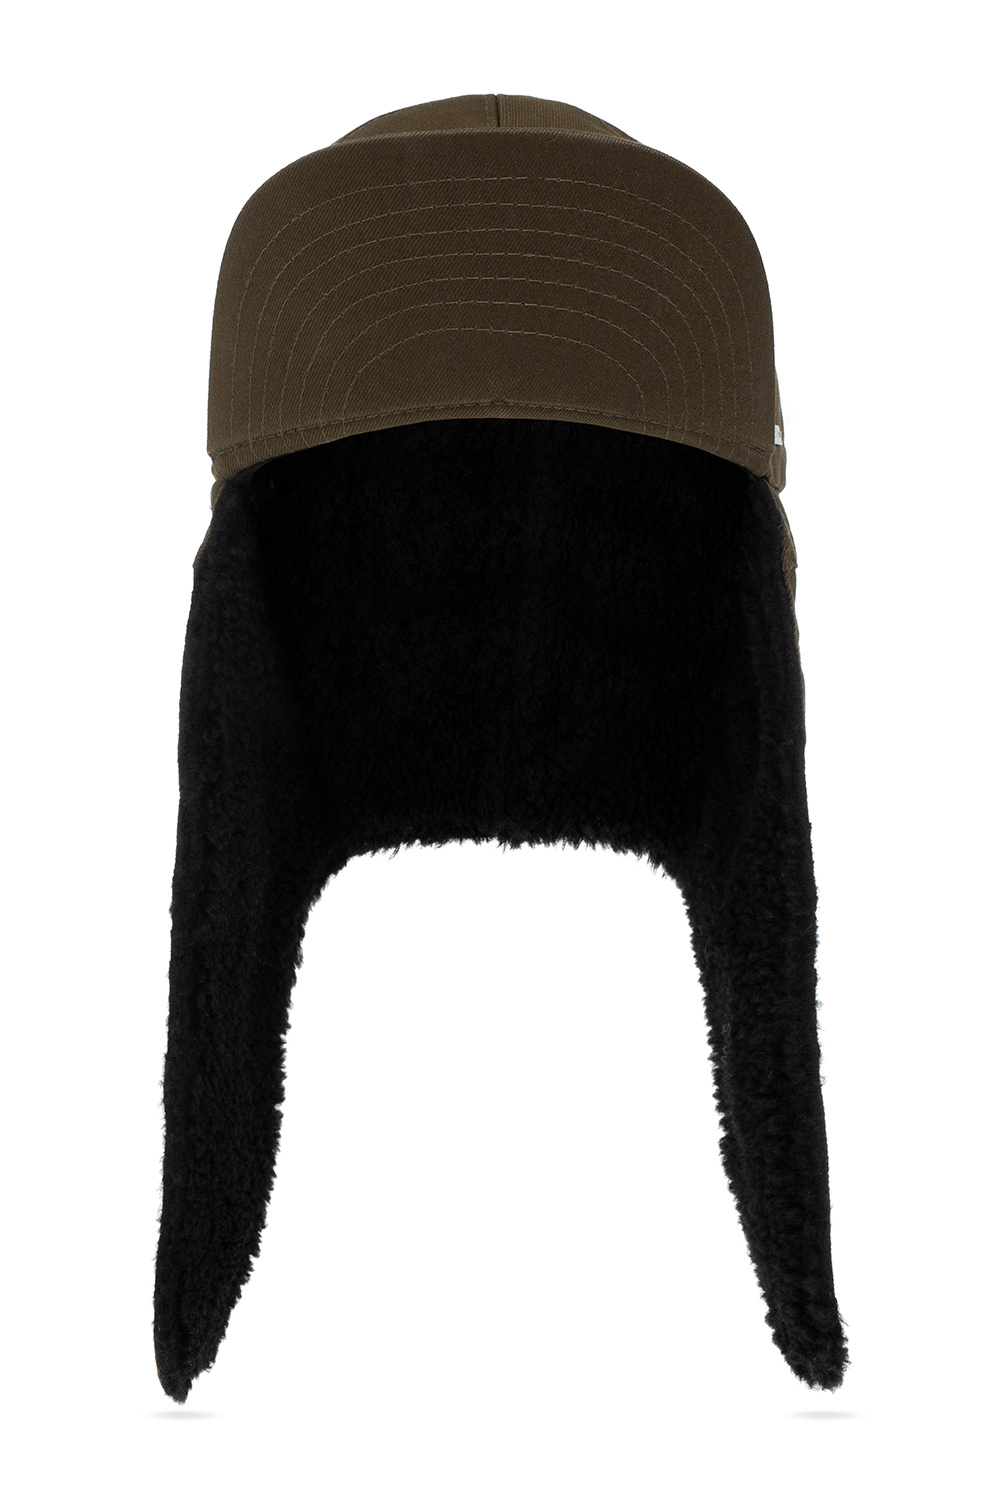 Dsquared2 Baseball cap with earflaps